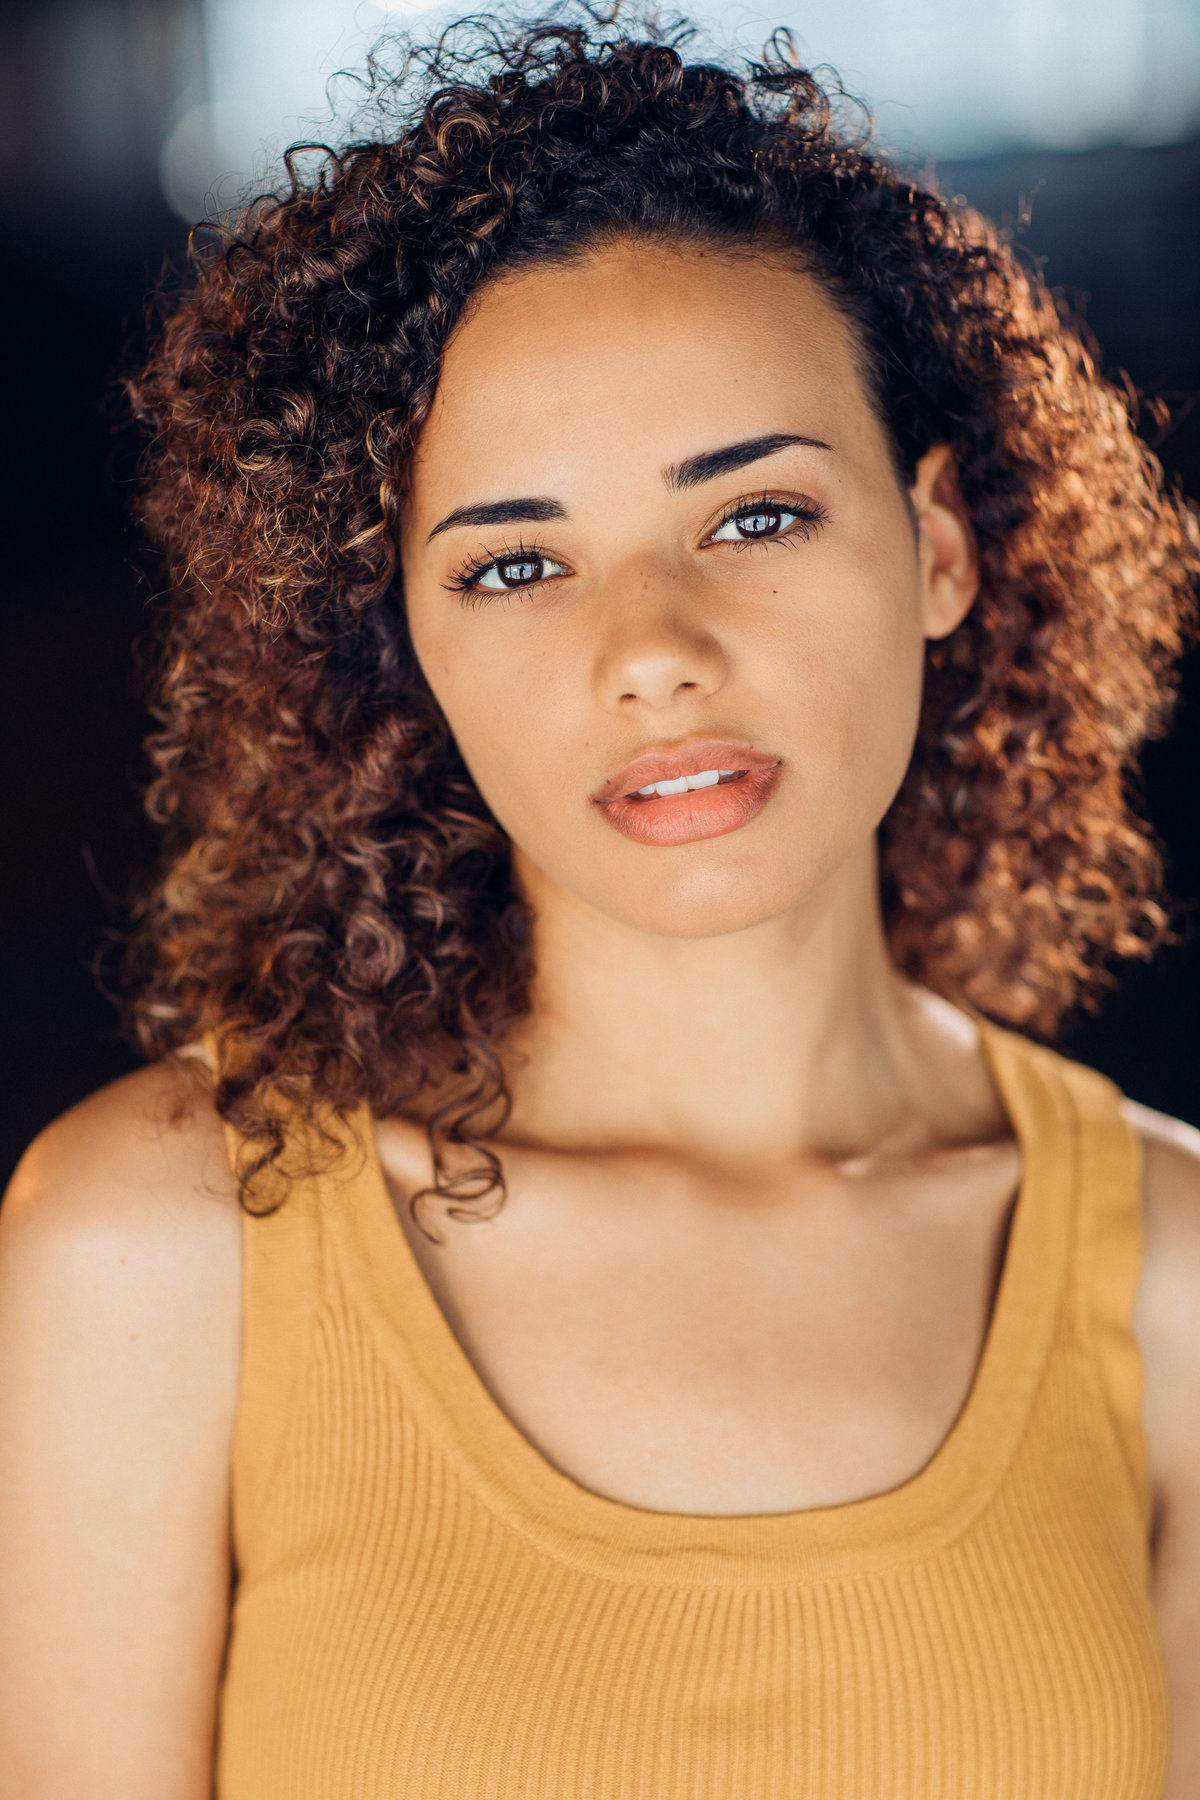 Headshot Photograph Of Young Woman In Yellow Sleeveless Los Angeles